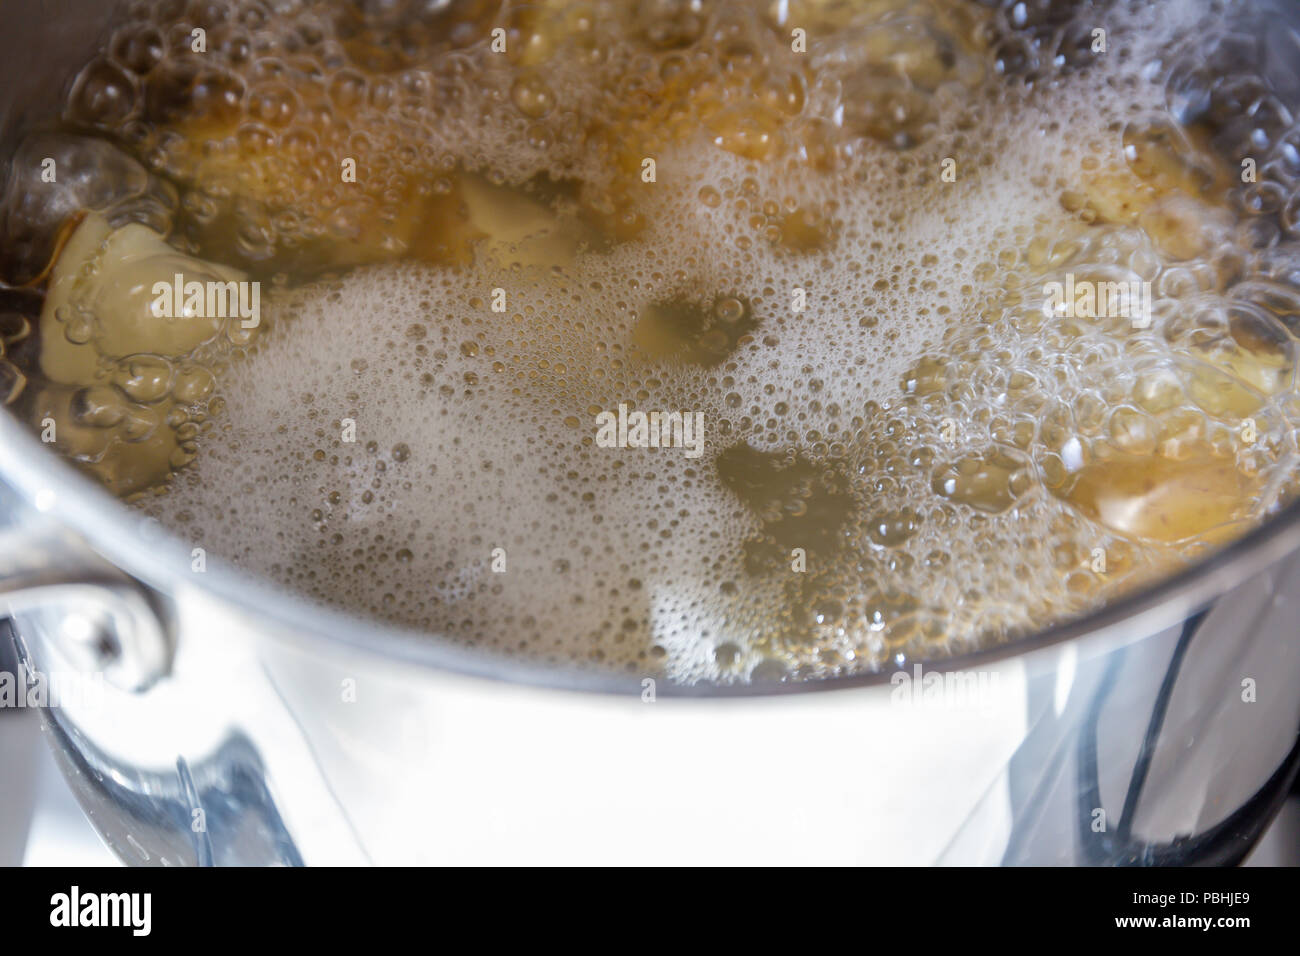 Pan of potatoes cooking in boiling water Stock Photo